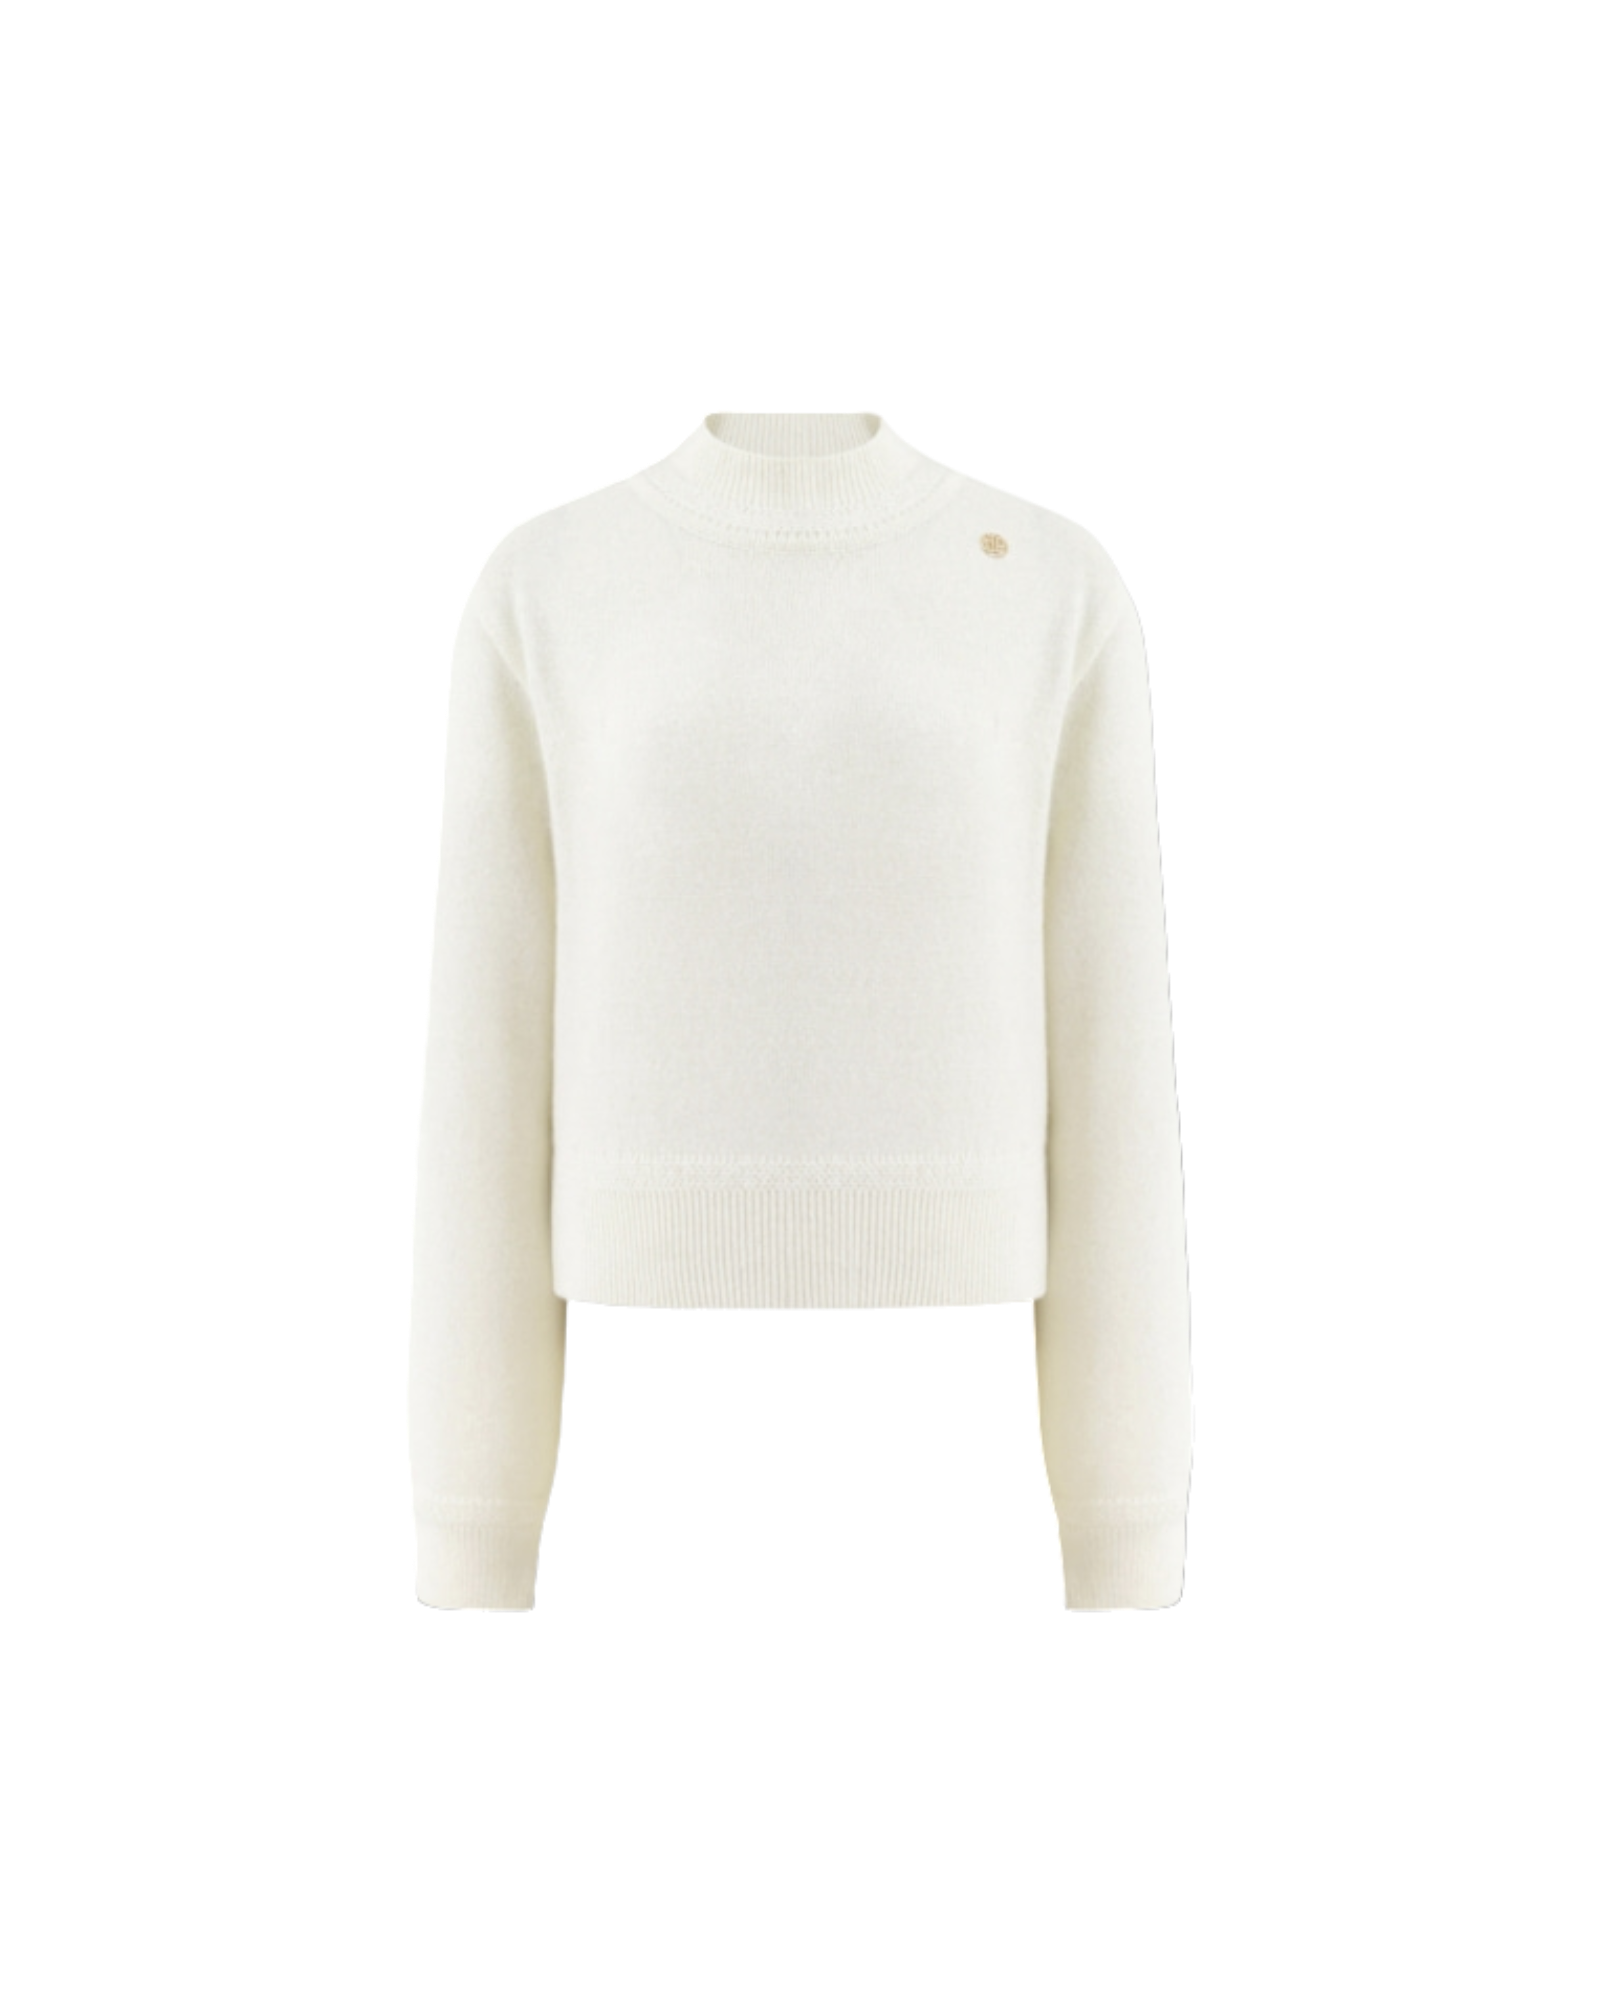 Charming Pullover In Ivory